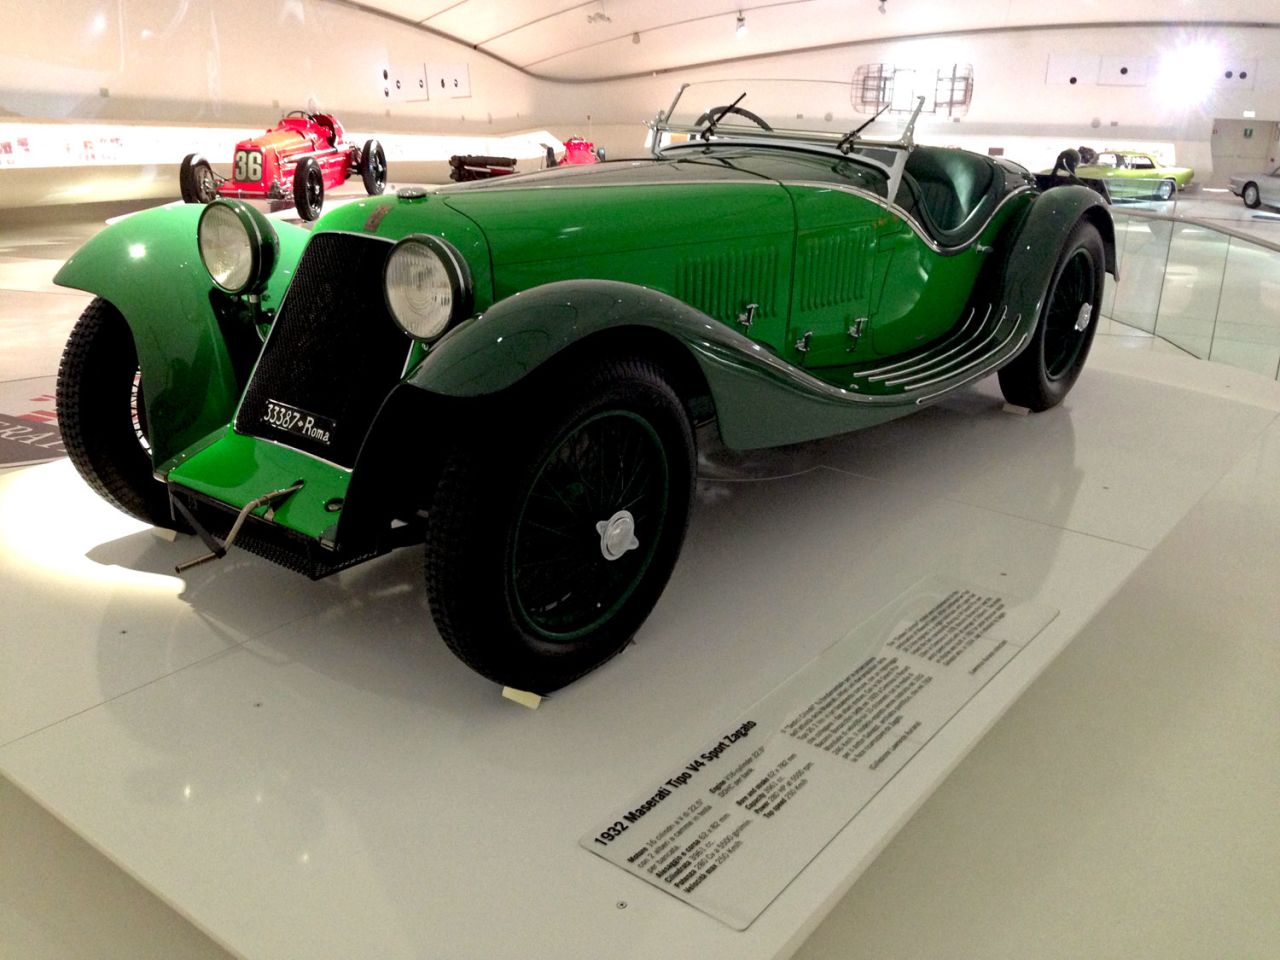 The Enzo Ferrari Museum also features earlier models such as this green two-seater 1932 Maserati V4 Zagato Sport.